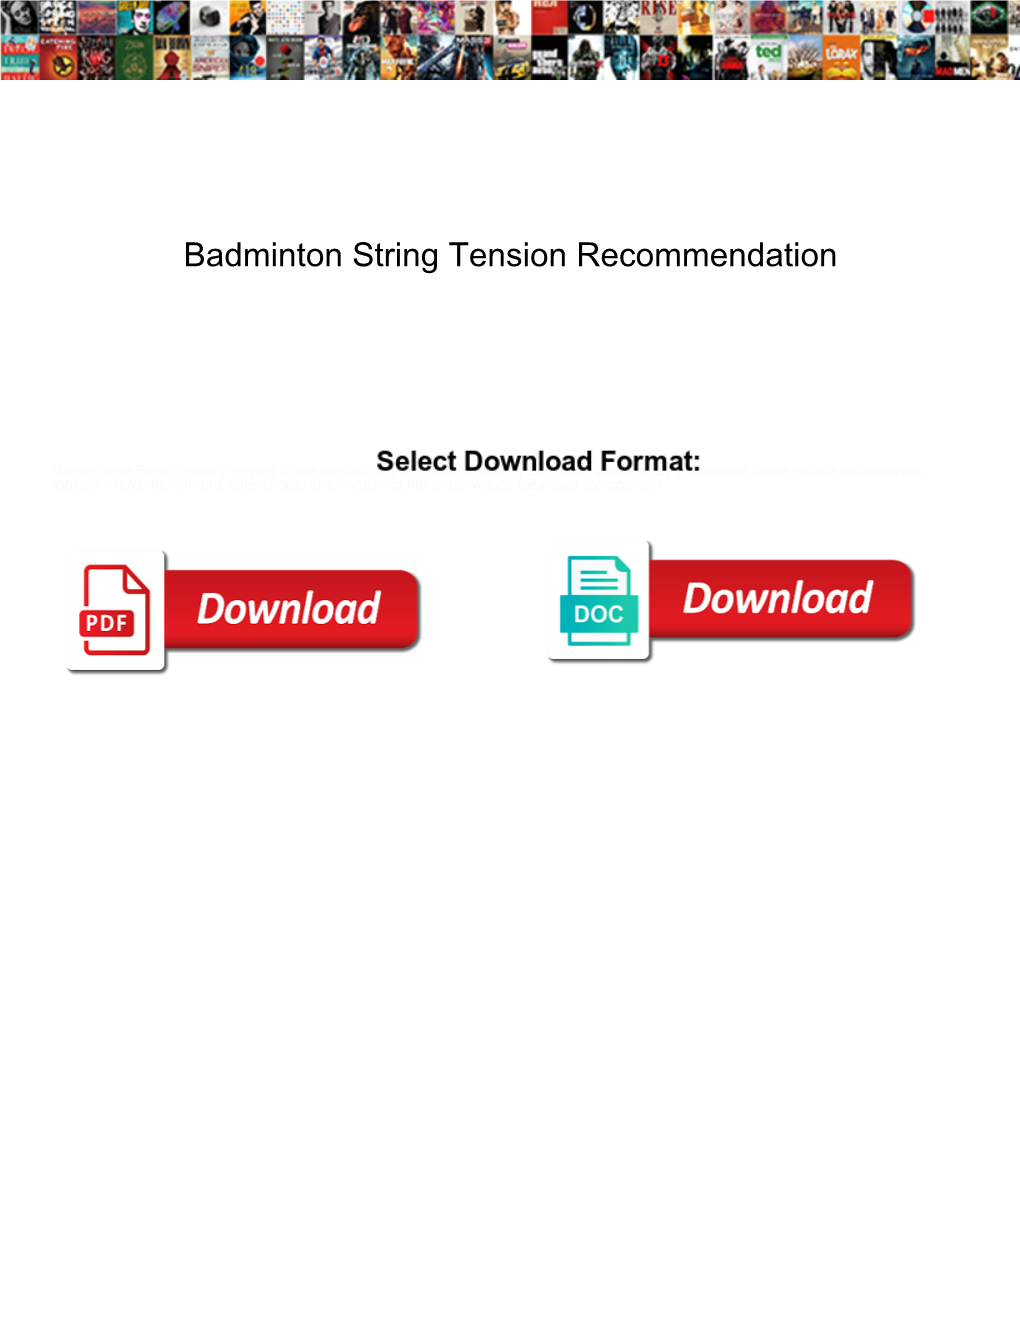 Badminton String Tension Recommendation